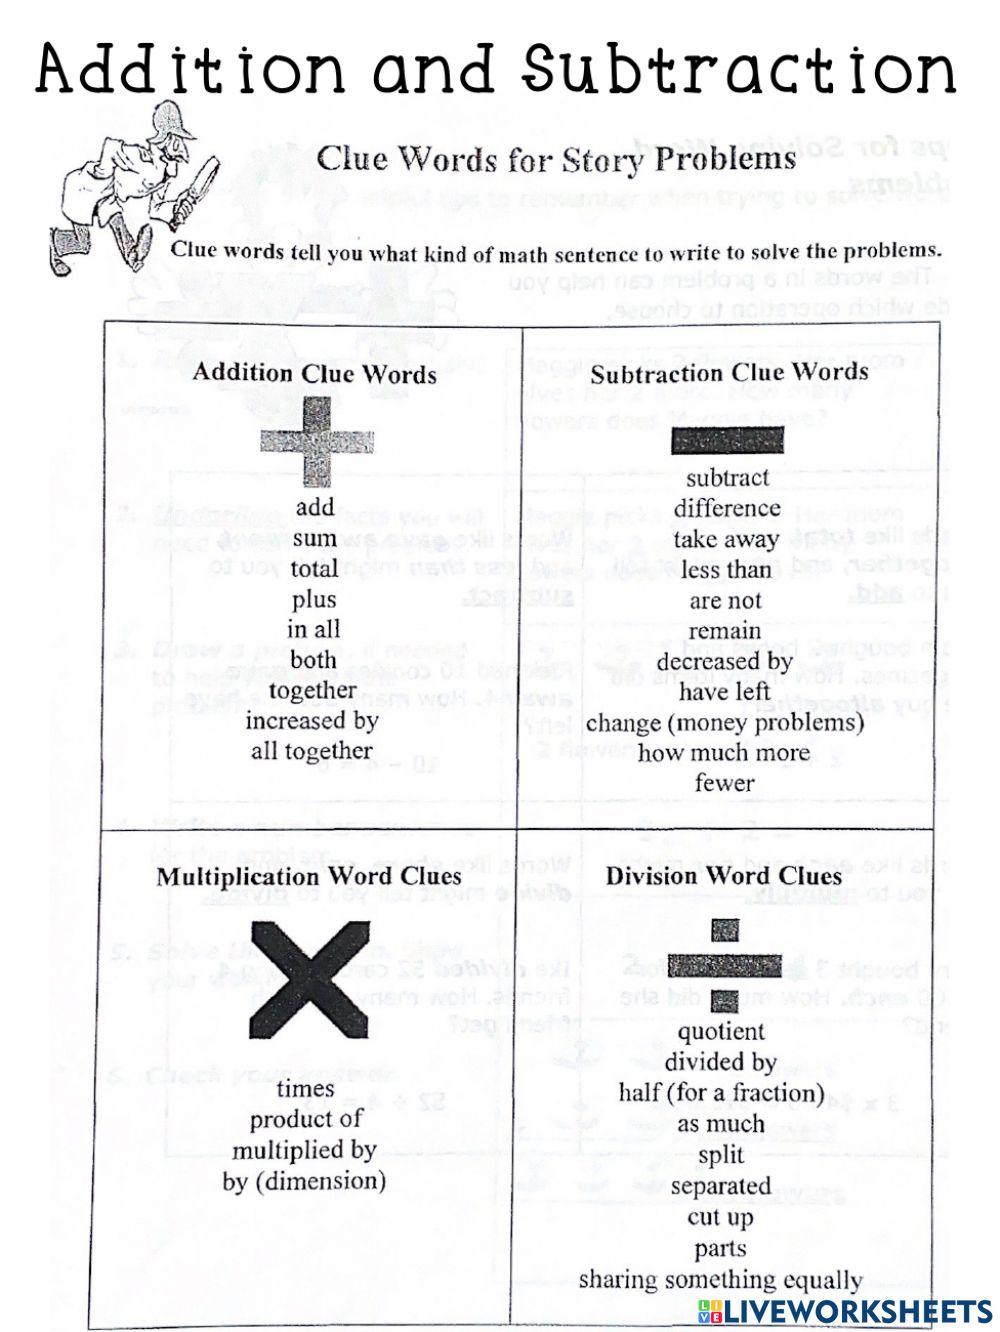 Addition and Subtraction Word problems